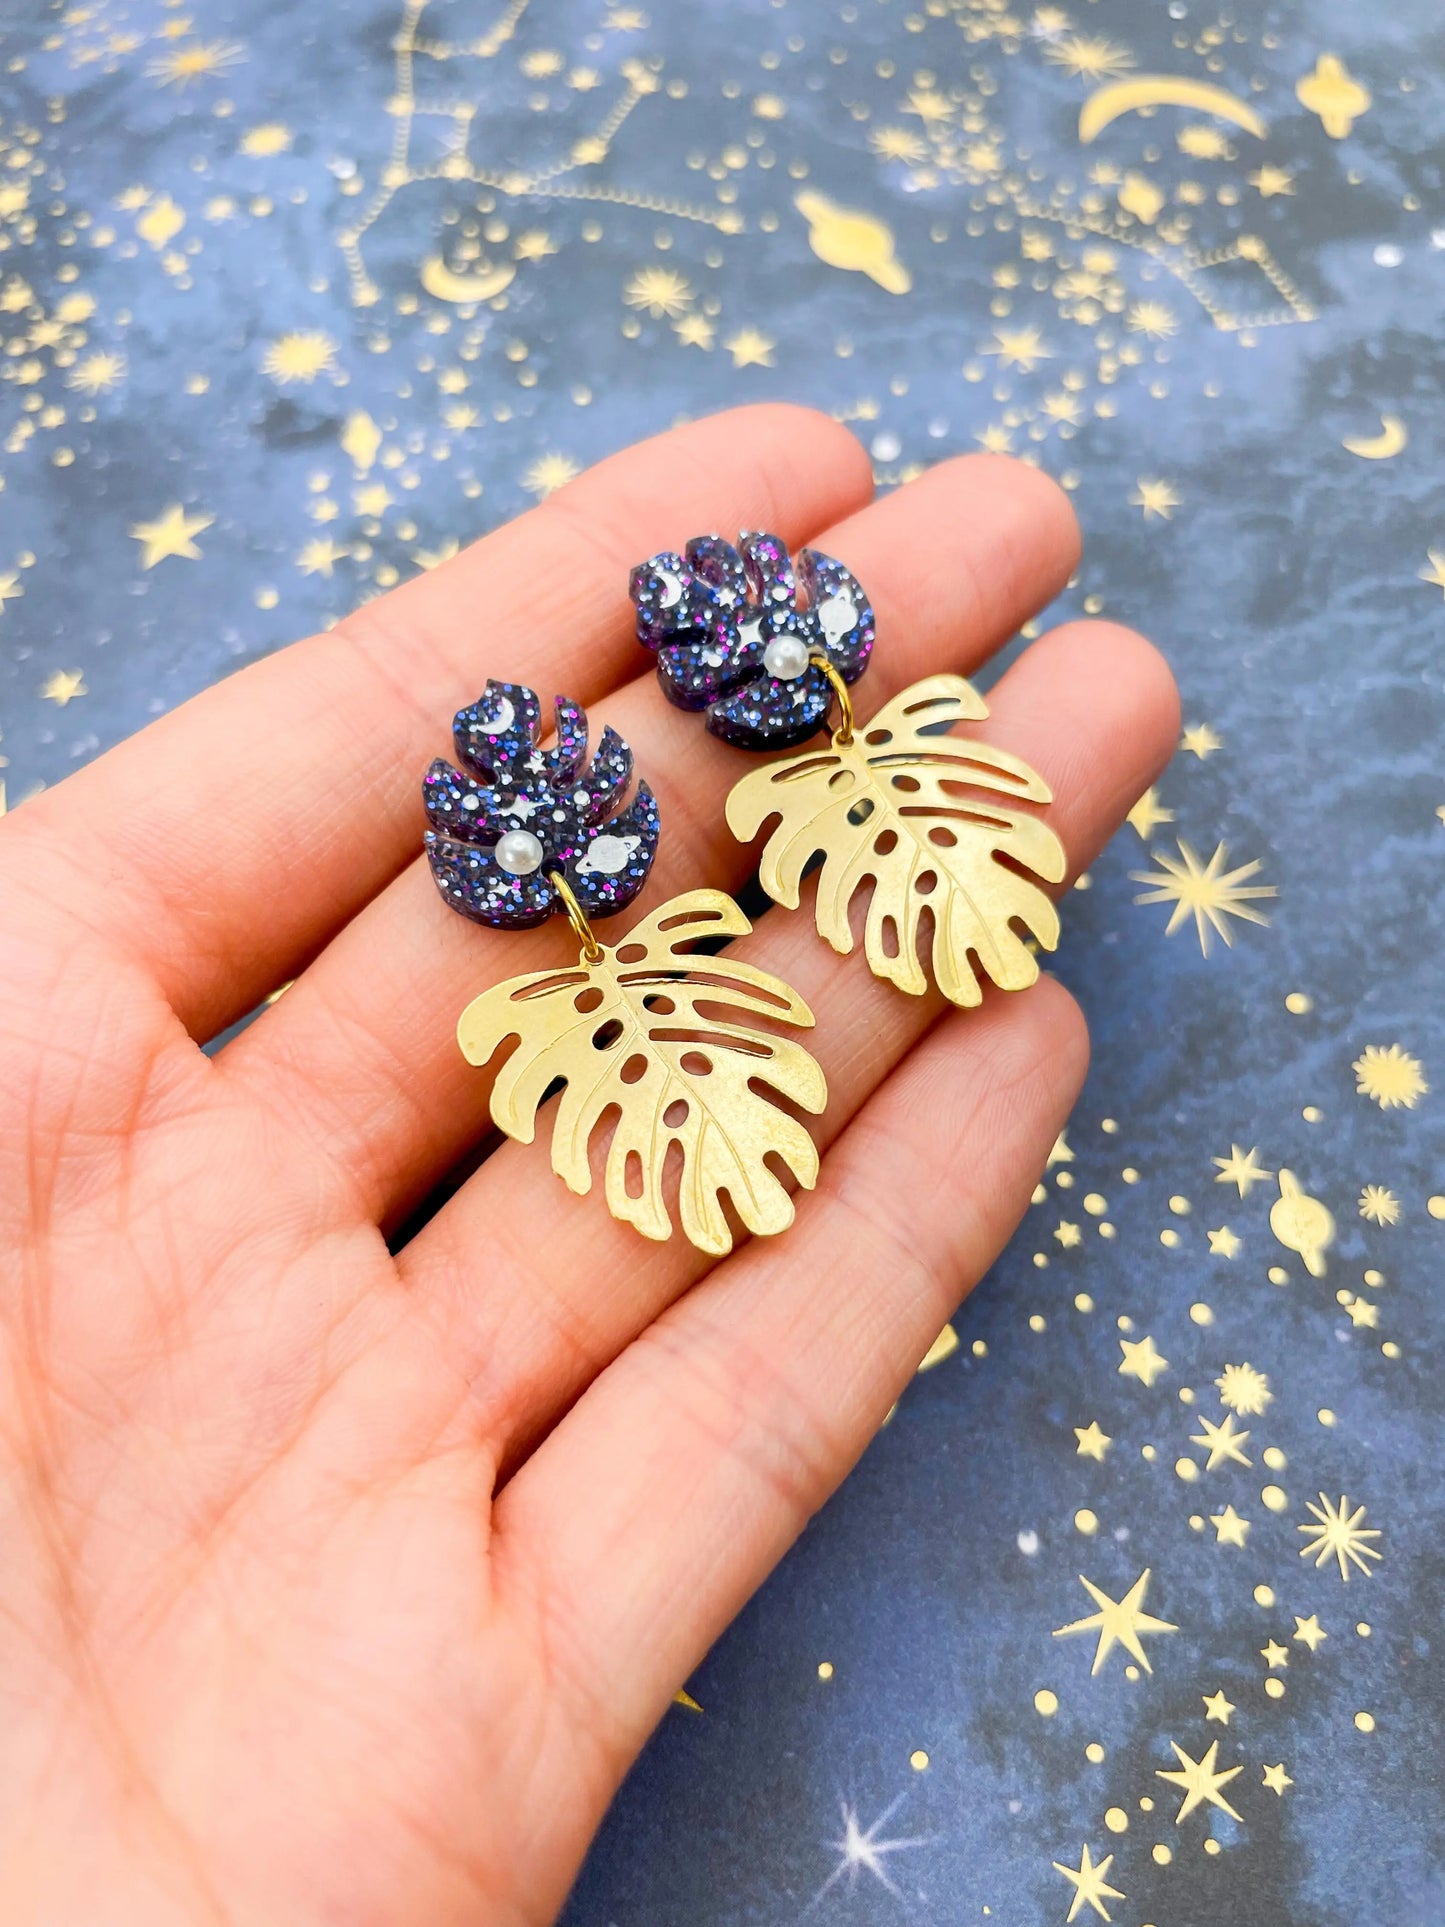 Purple, Blue and Gold Glitter Planet Acrylic Monstera Leaf Duo Dangle Earrings from Sapphire Frills